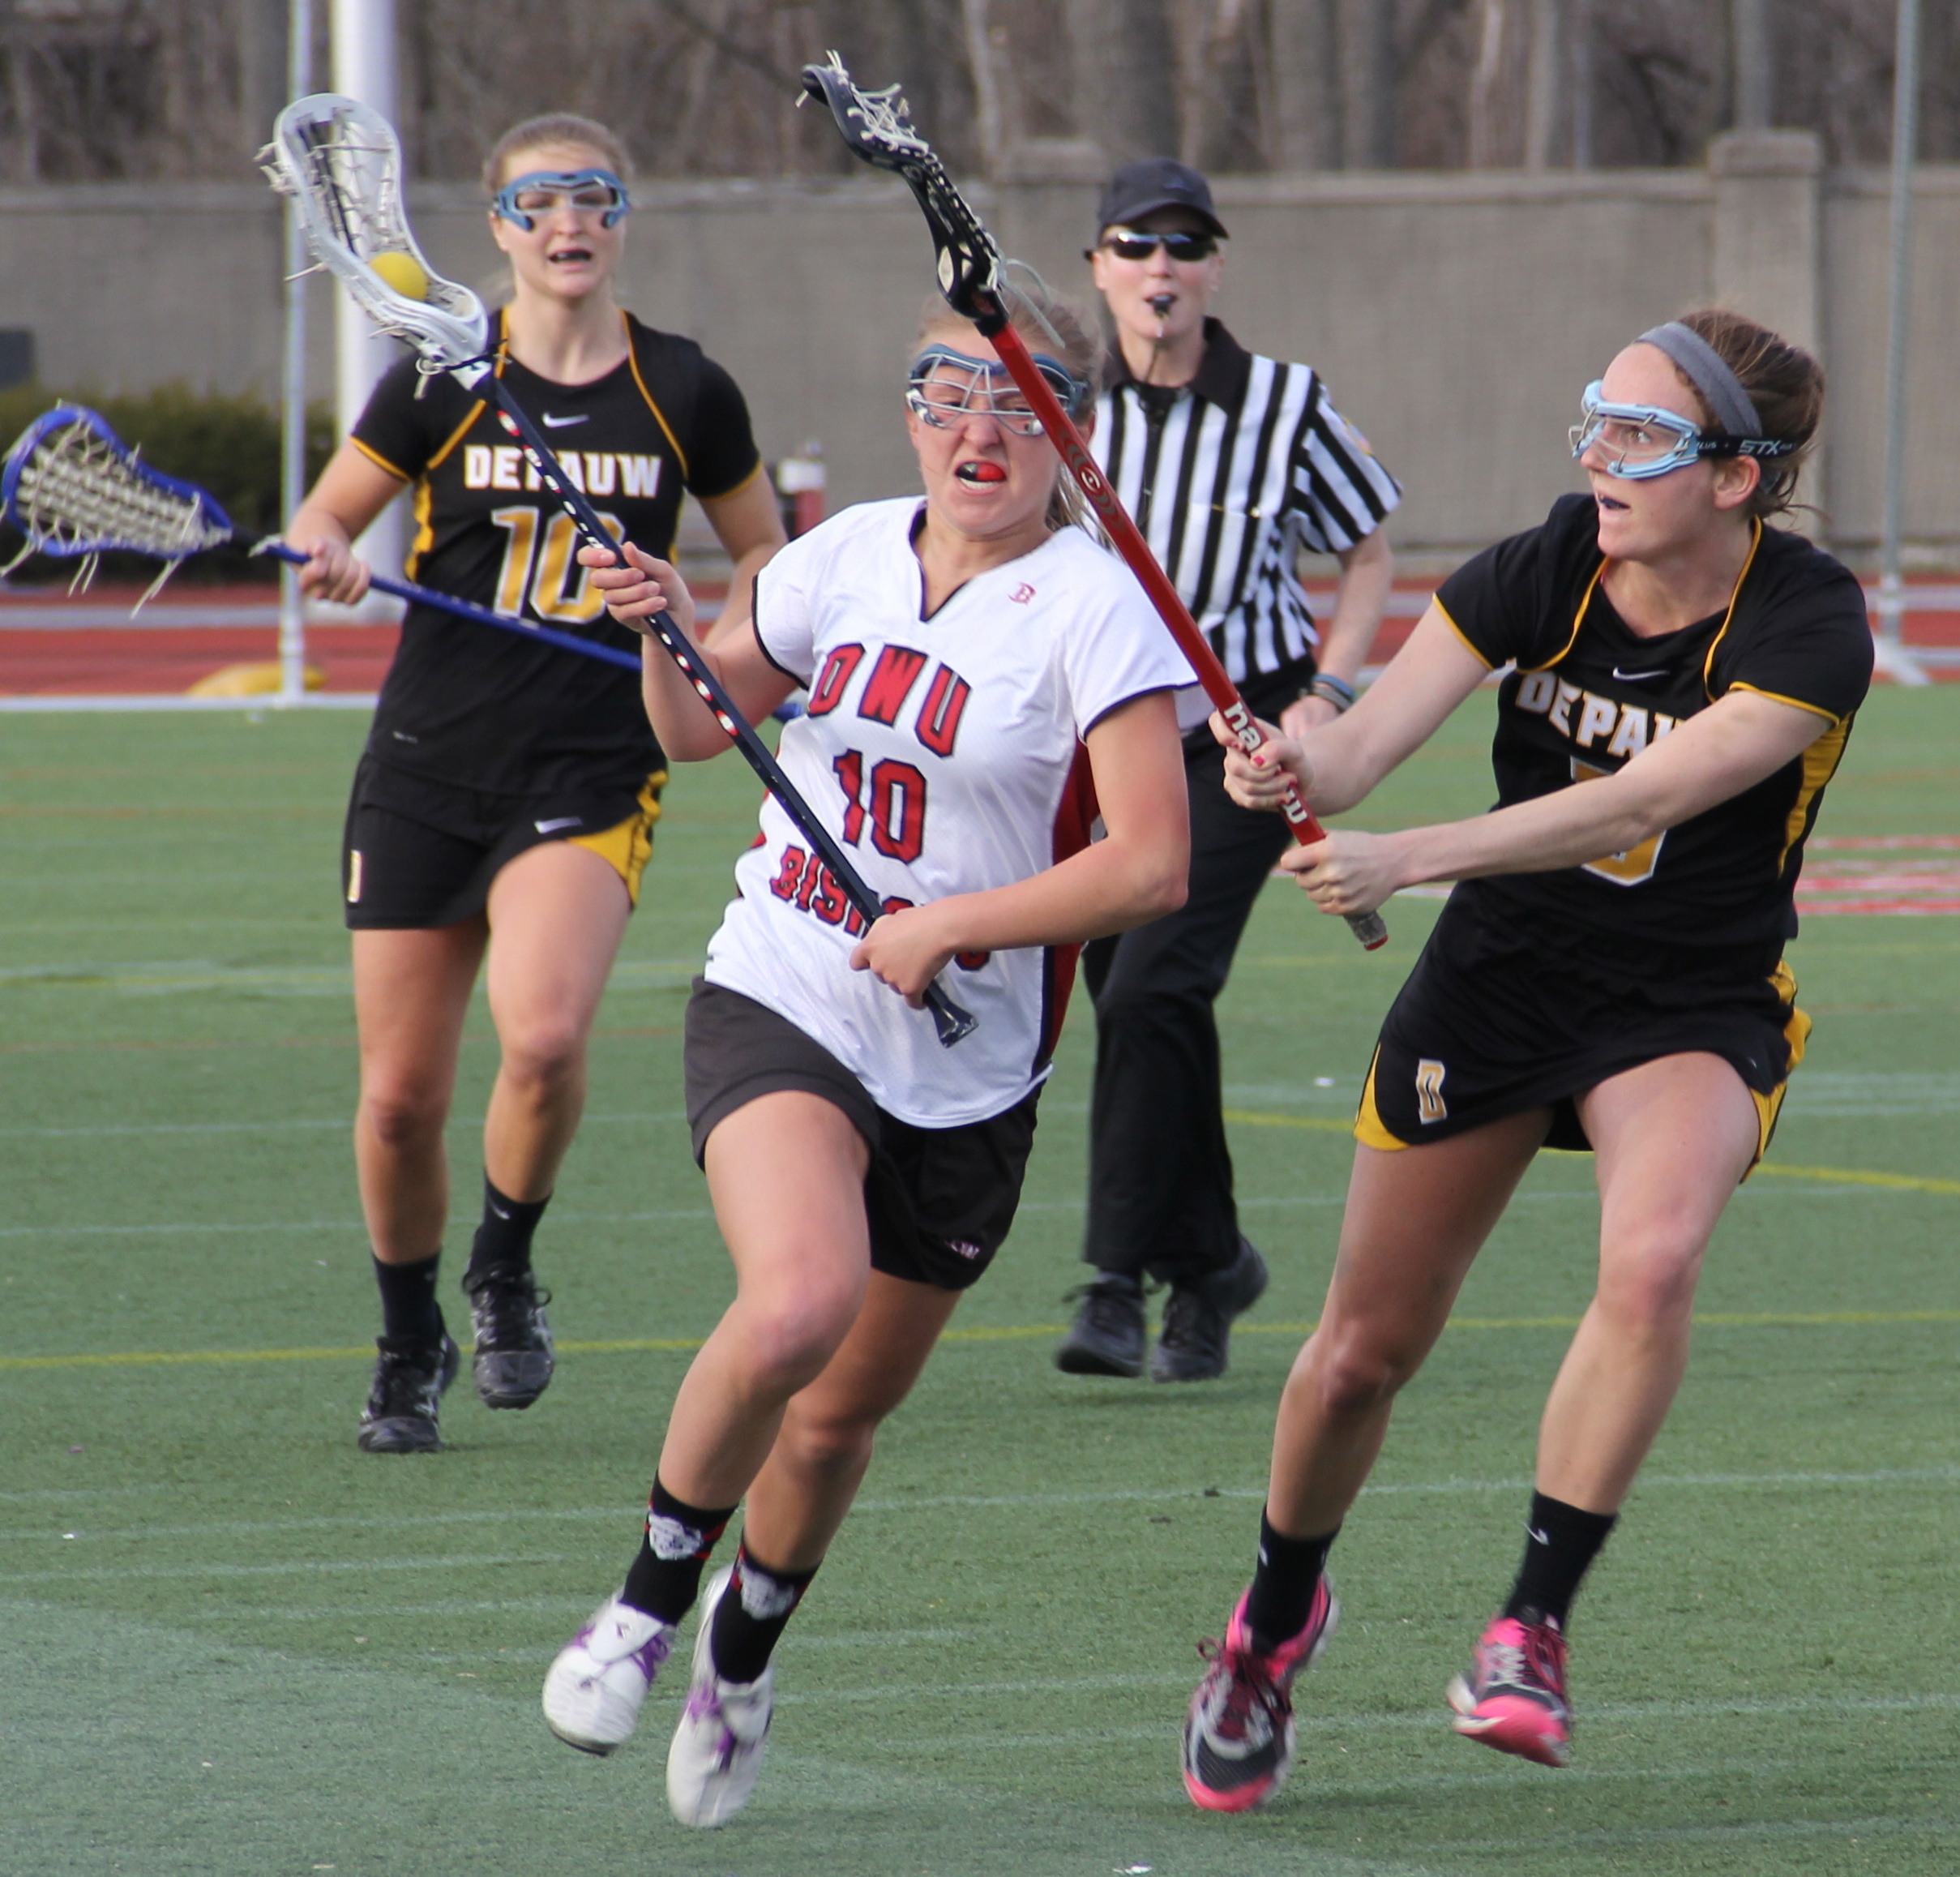 Lady Bishops lacrosse ready for NCAC